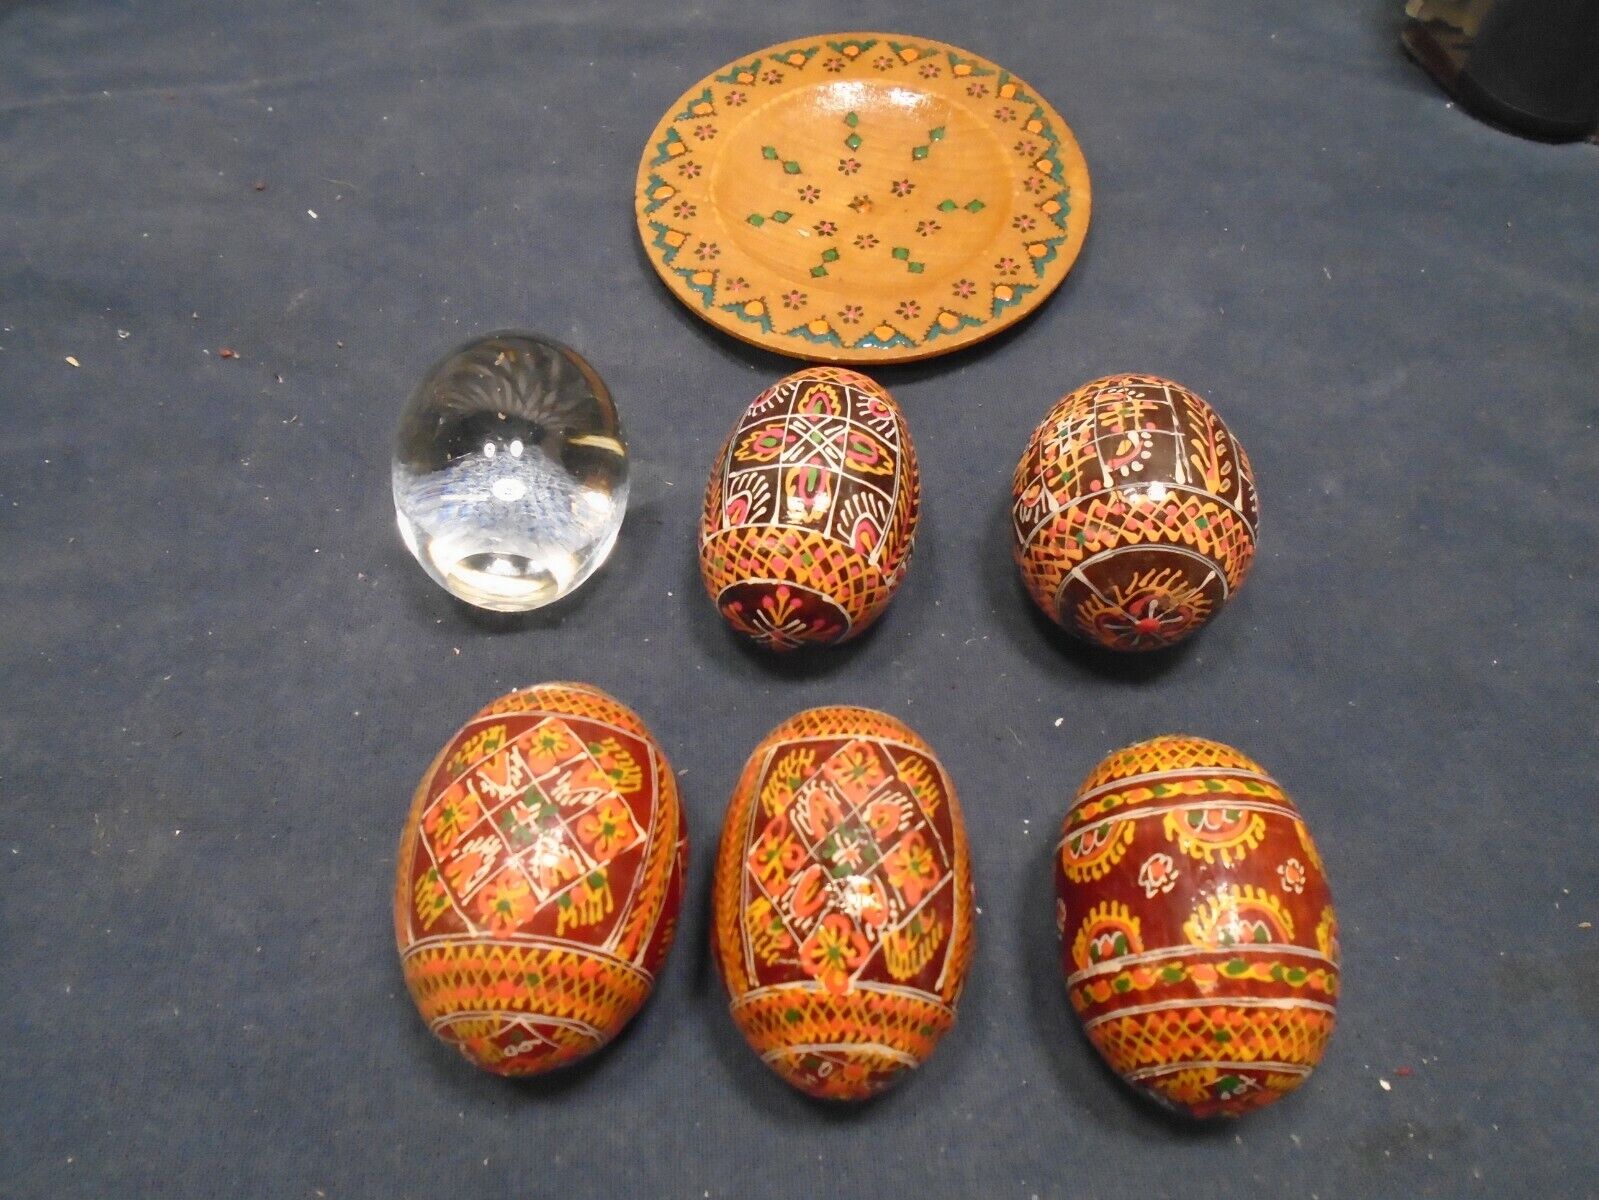 6 Exquisite VTG Russian ? Mediterranean Lacquered Eggs Hand Painted Solid Wood 